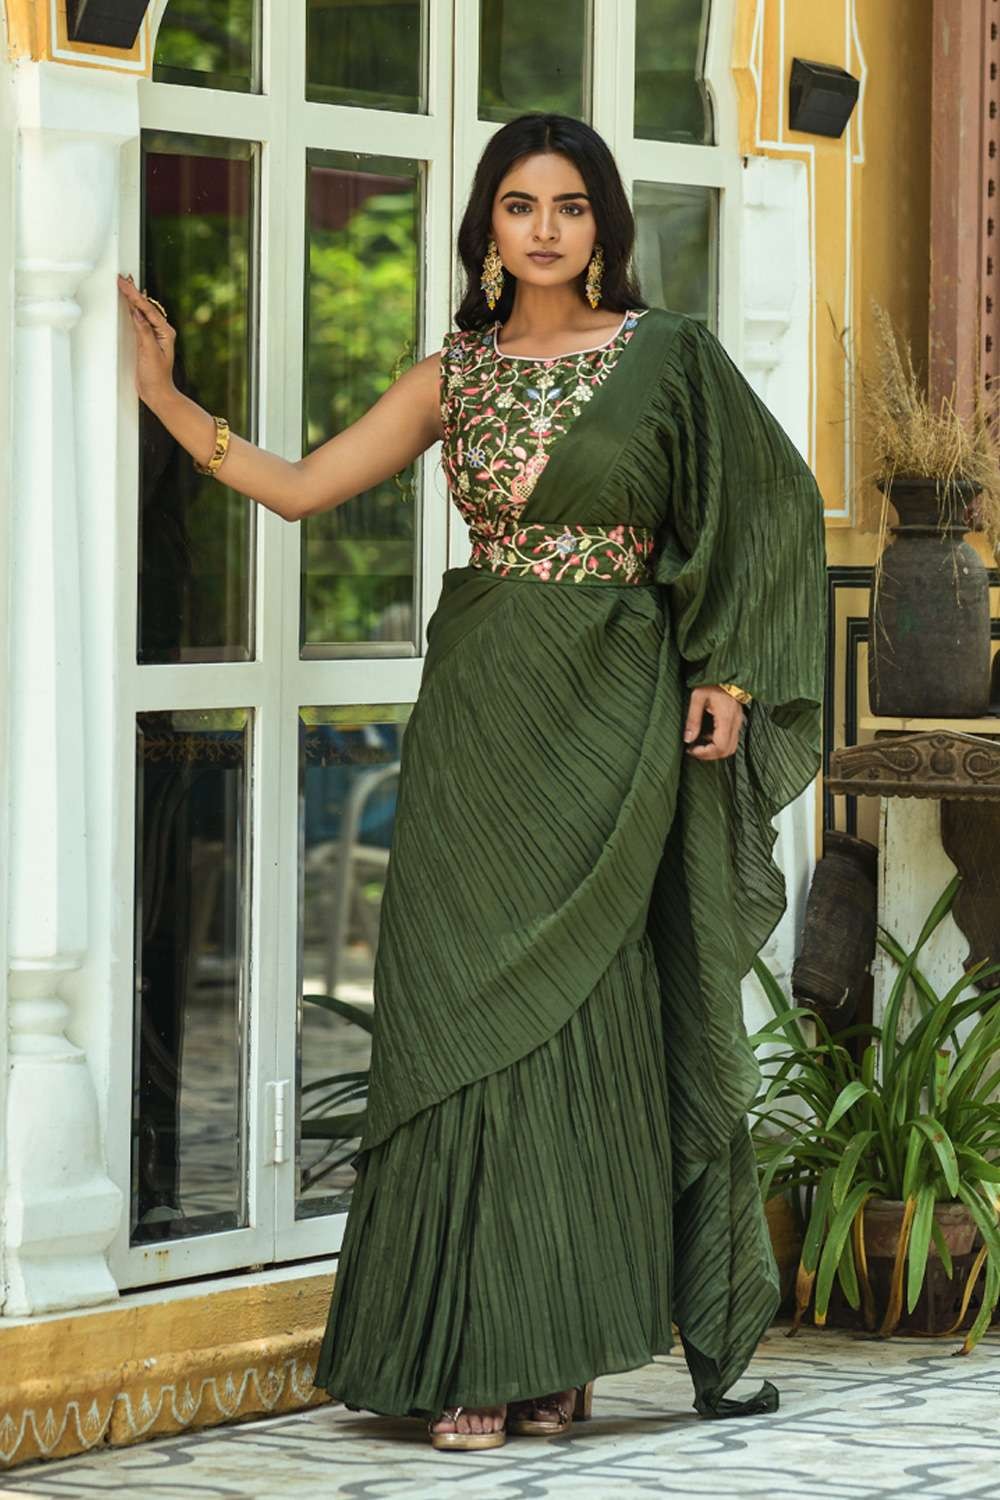 https://media.shopkund.com/media/catalog/product/cache/3/image/9df78eab33525d08d6e5fb8d27136e95/a/c/acu7619-1-green-party-wear-saree-with-embroidered-georgette-sr23293_1_.jpg